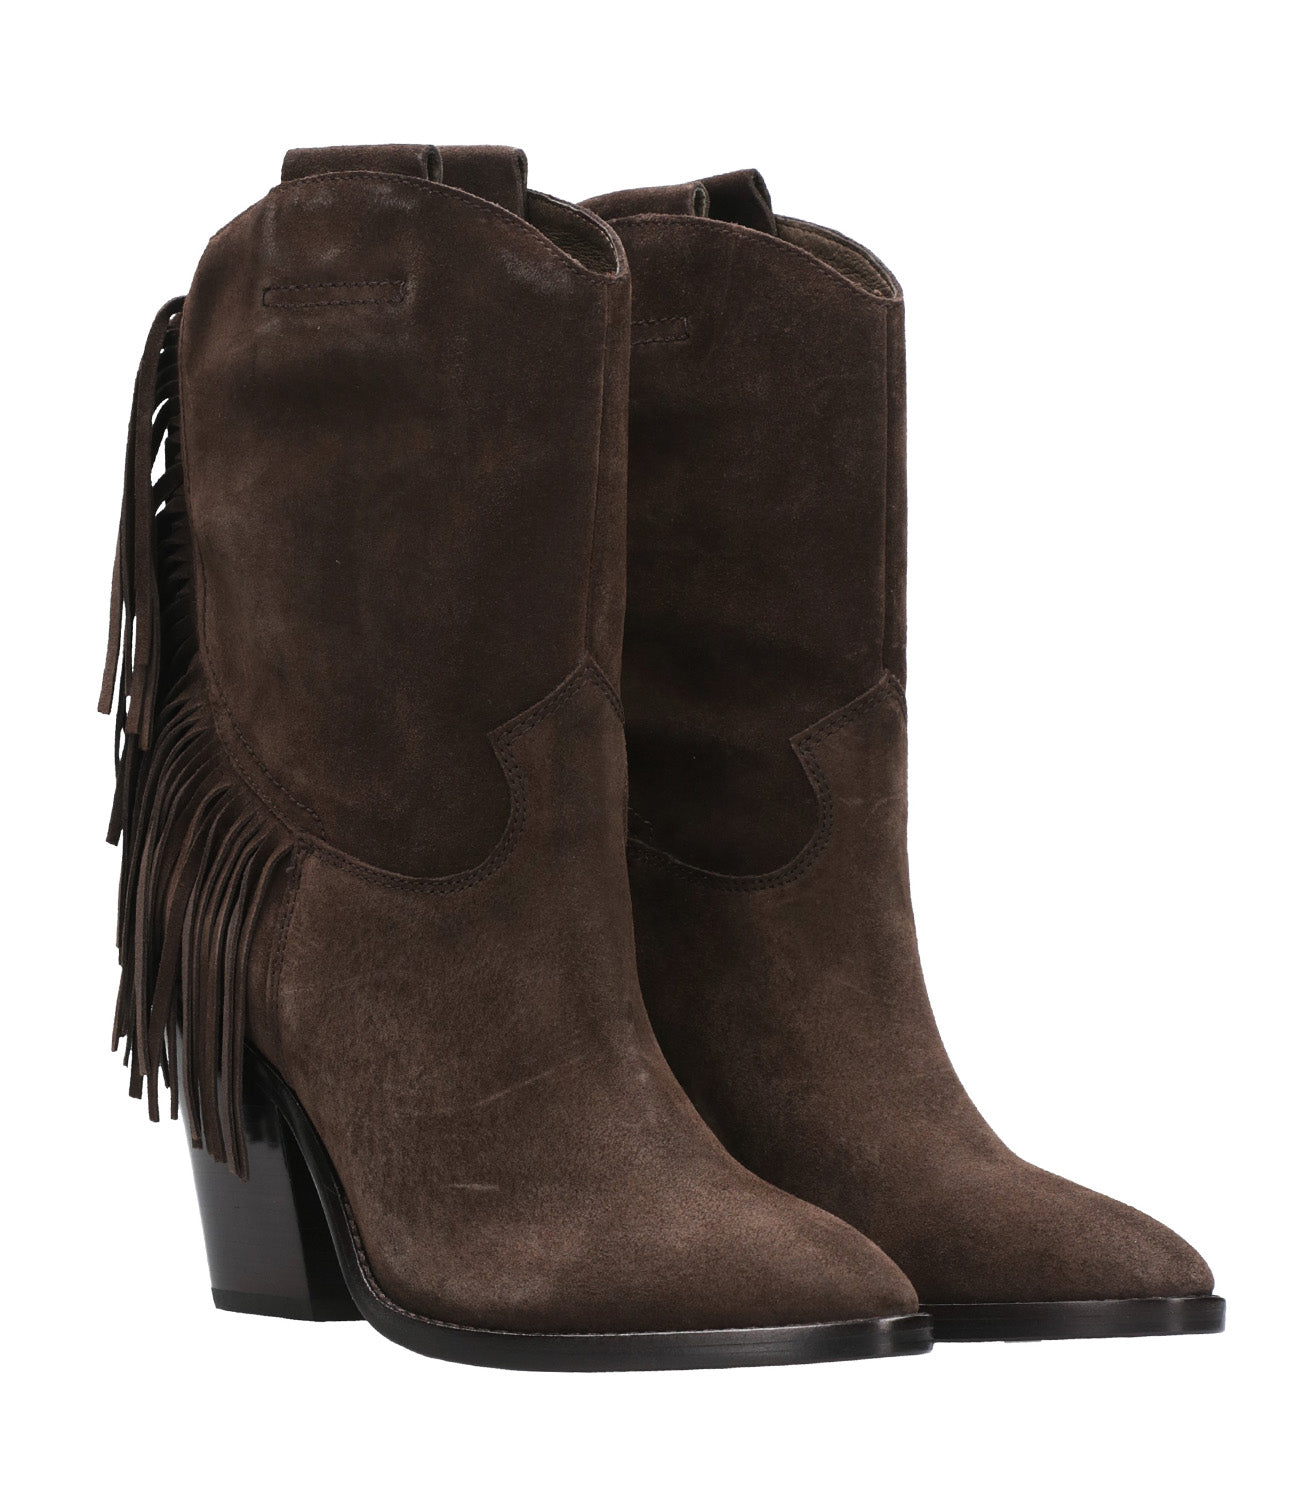 Emotion Bis ankle boot